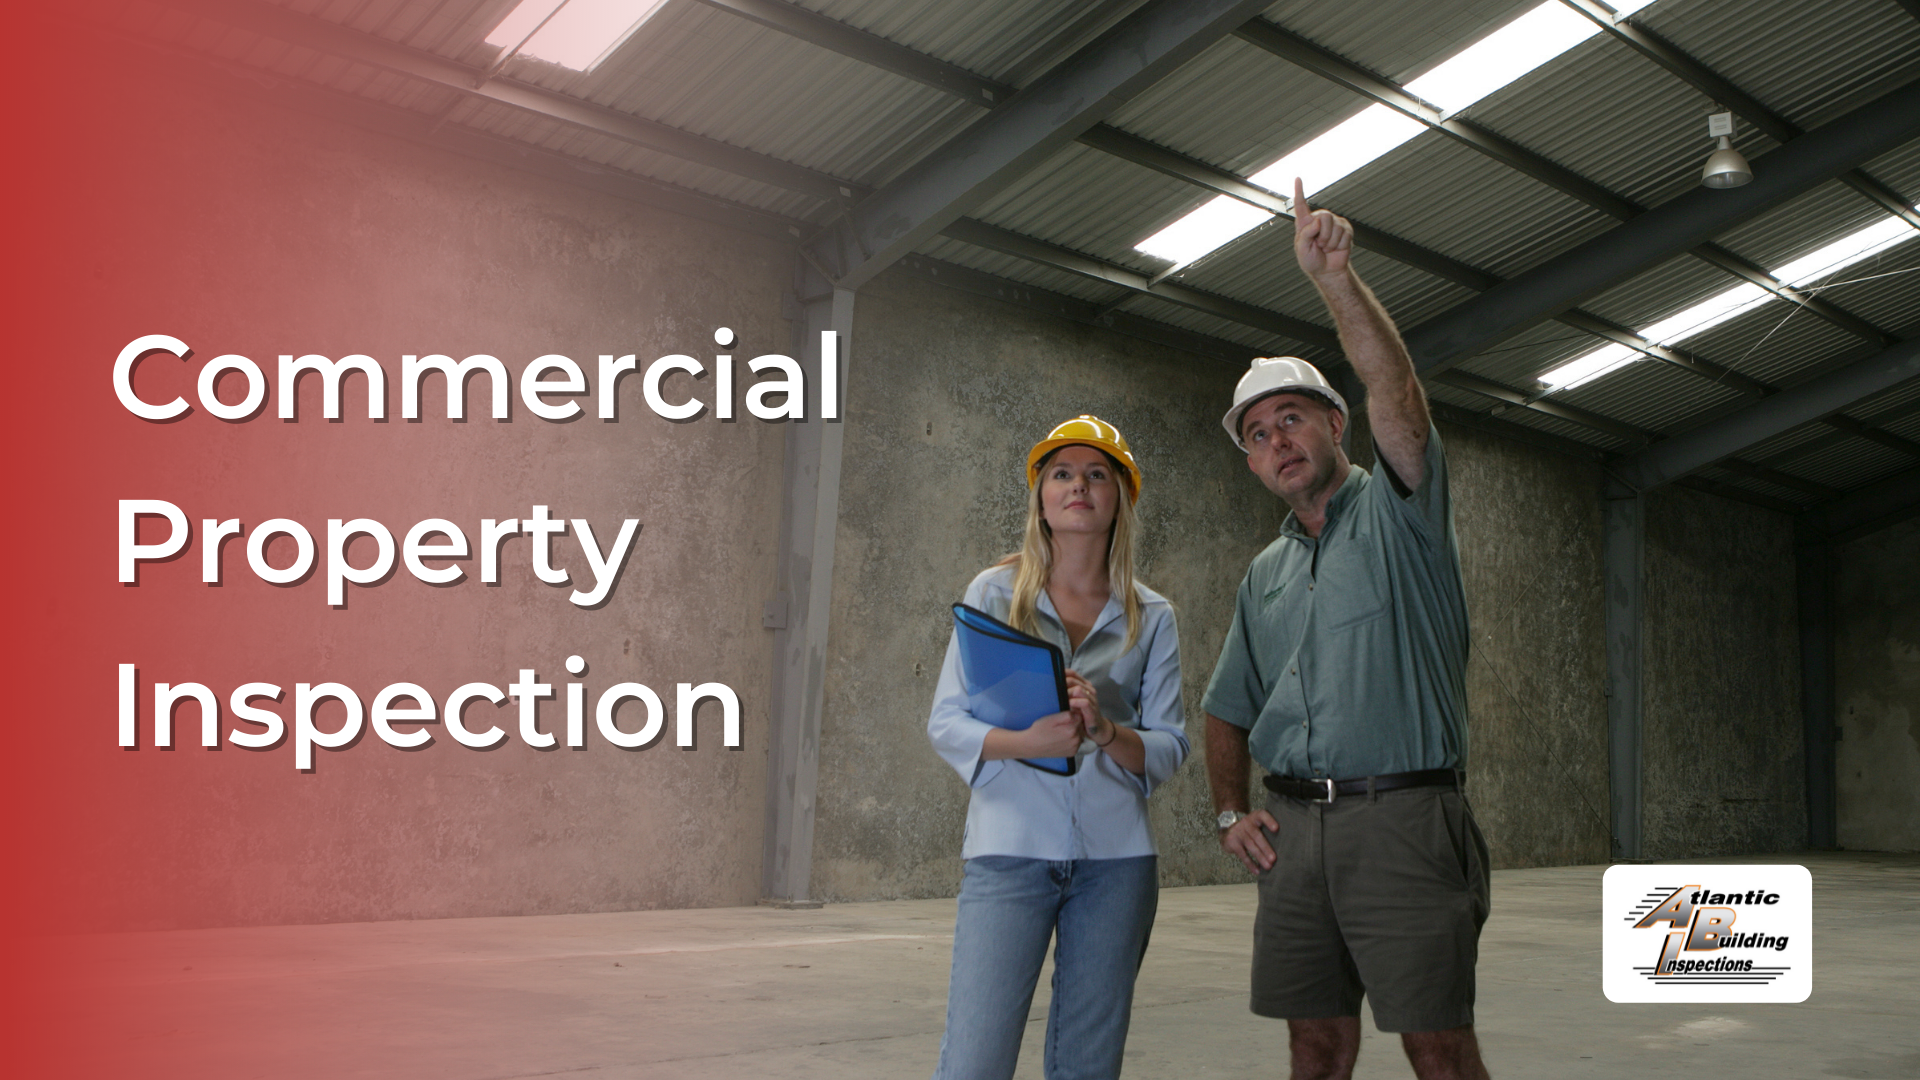 What to Expect During a Commercial Property Inspection?